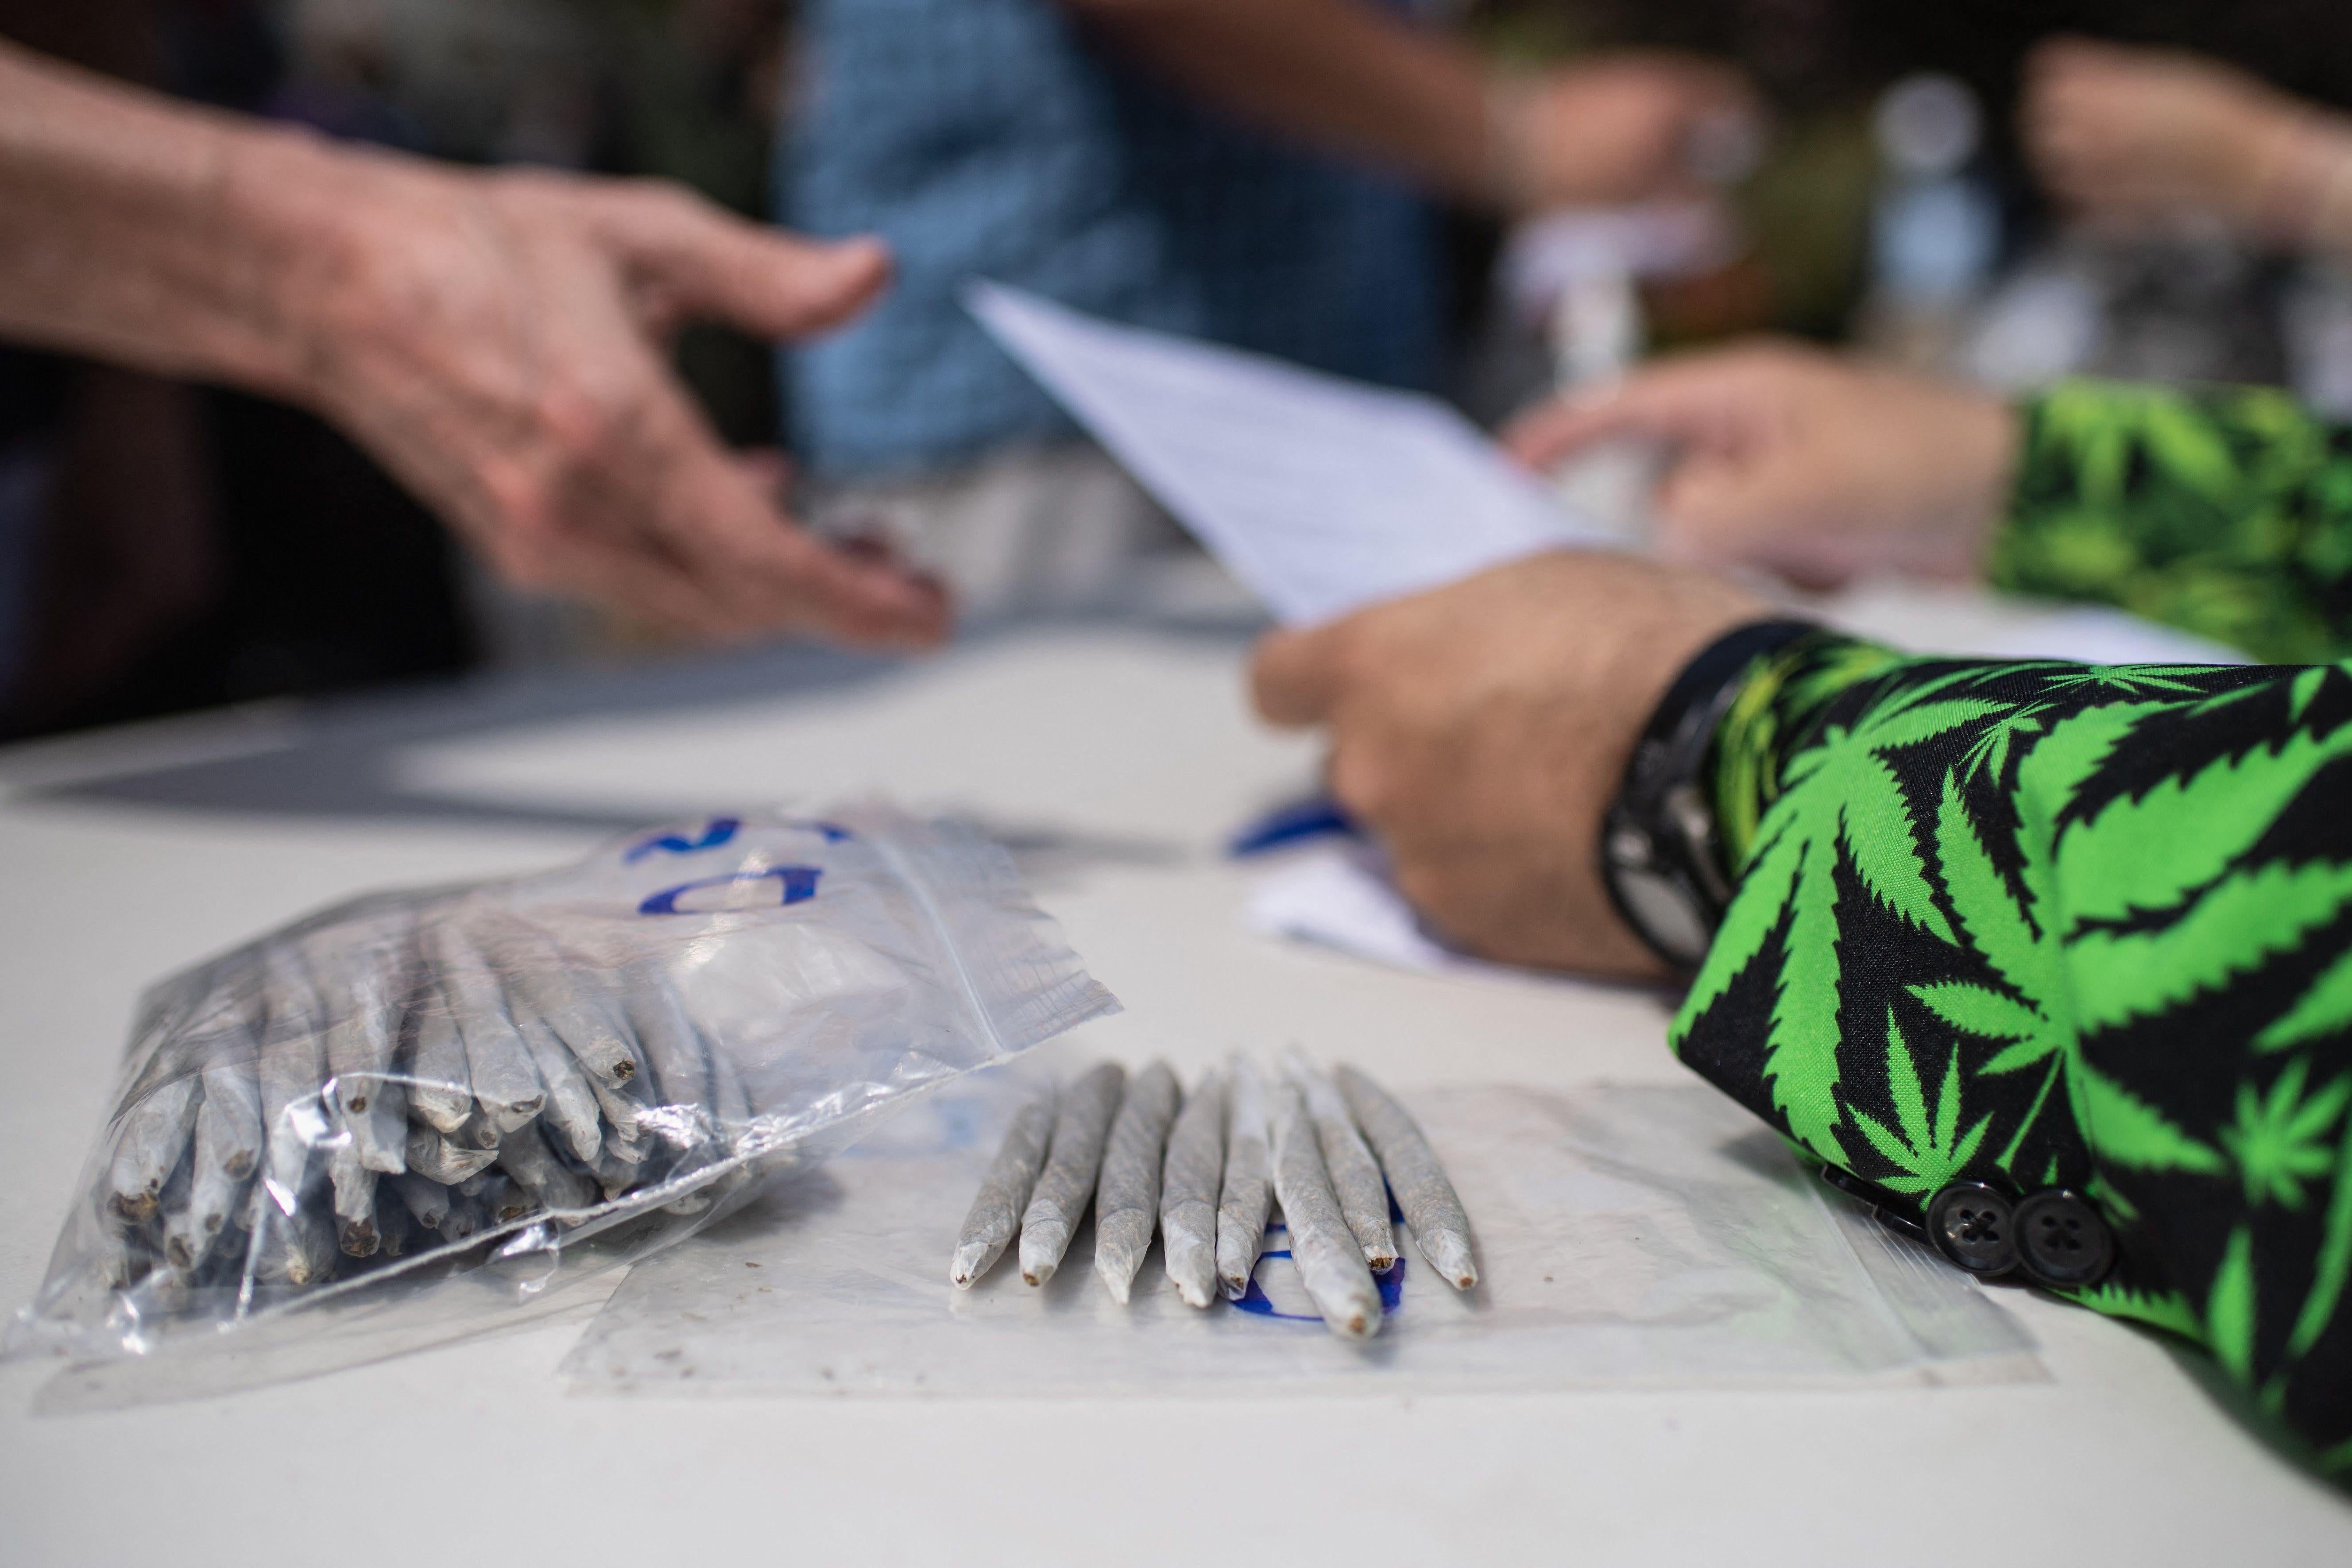 Marijuana activists hand out free joints to vaccinated New Yorkers on April 20, 2021 in New York City. (Photo by Angela Weiss / AFP) (Photo by ANGELA WEISS/AFP via Getty Images)